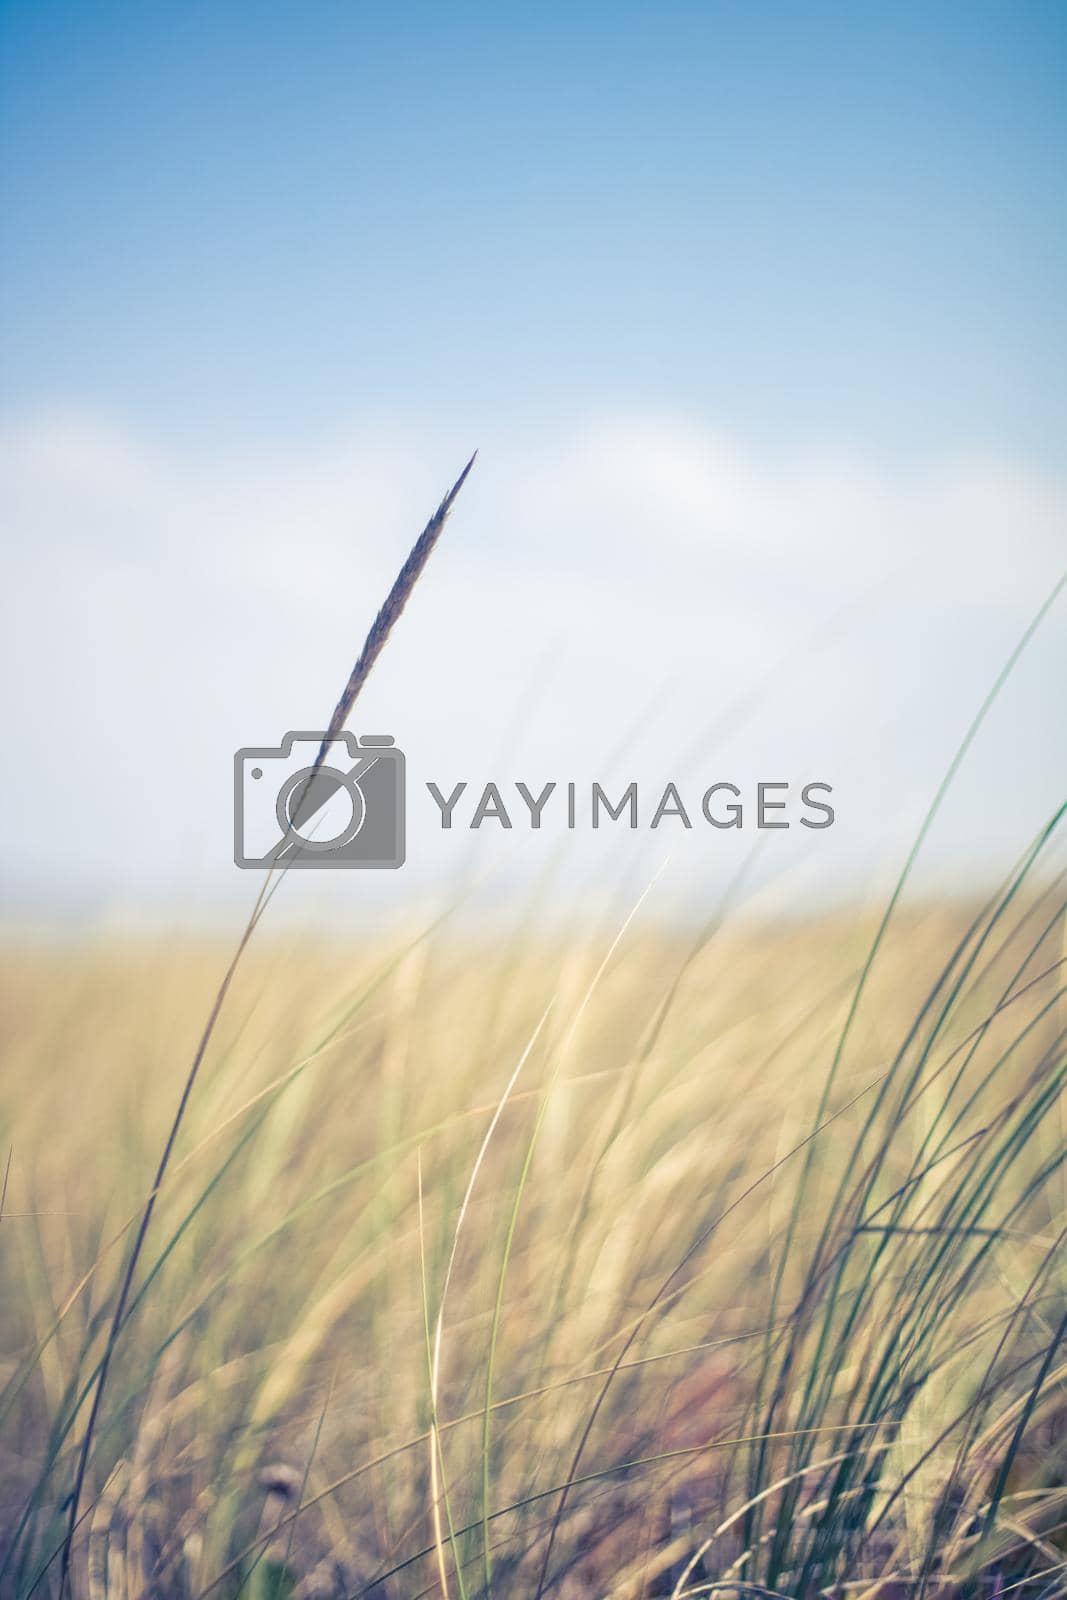 Royalty free image of Rural field, a day in countryside by Anneleven